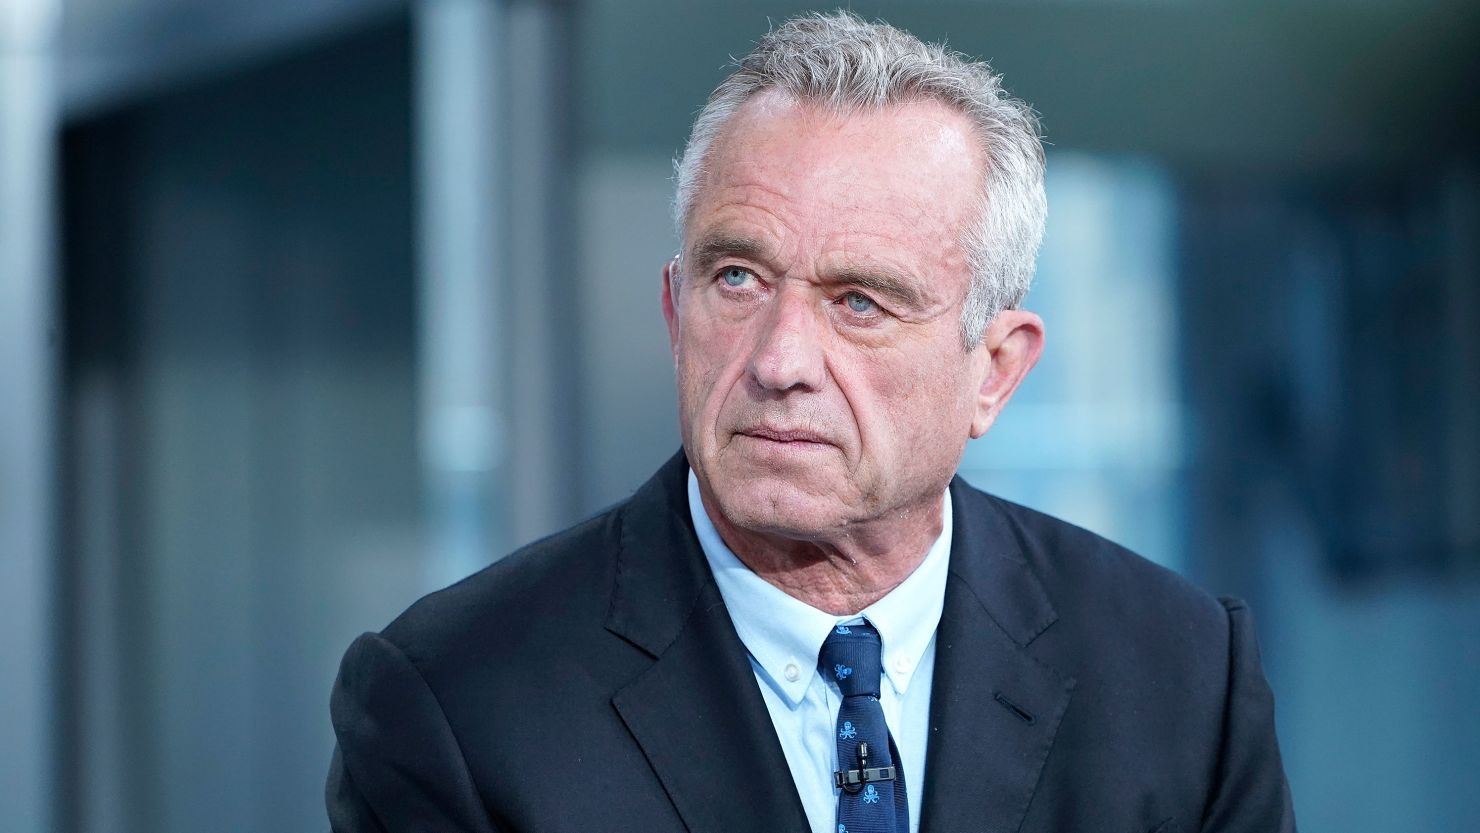 Democratic presidential candidate Robert F. Kennedy Jr. visits "Fox & Friends" at Fox News Channel Studios on July 14, 2023 in New York City.